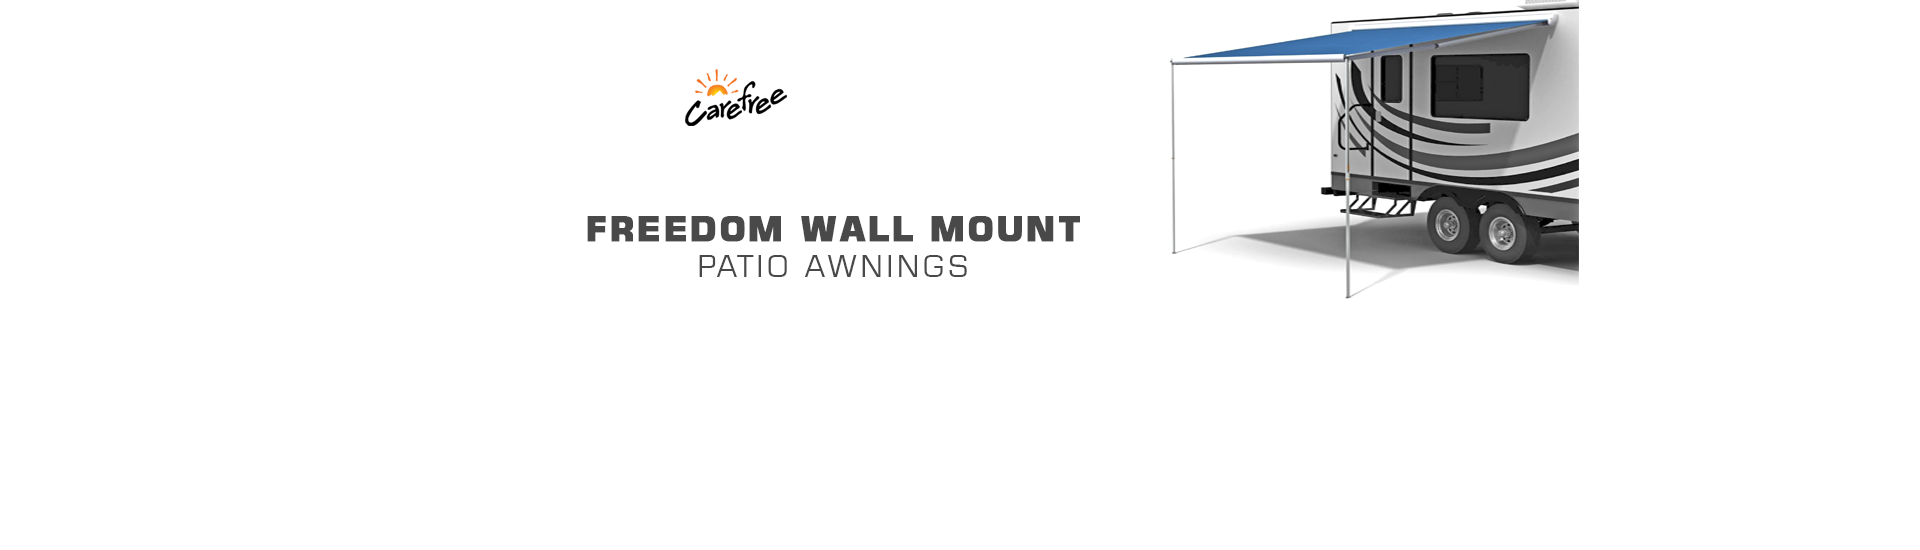 Carefree Freedom Wall Mount Awning